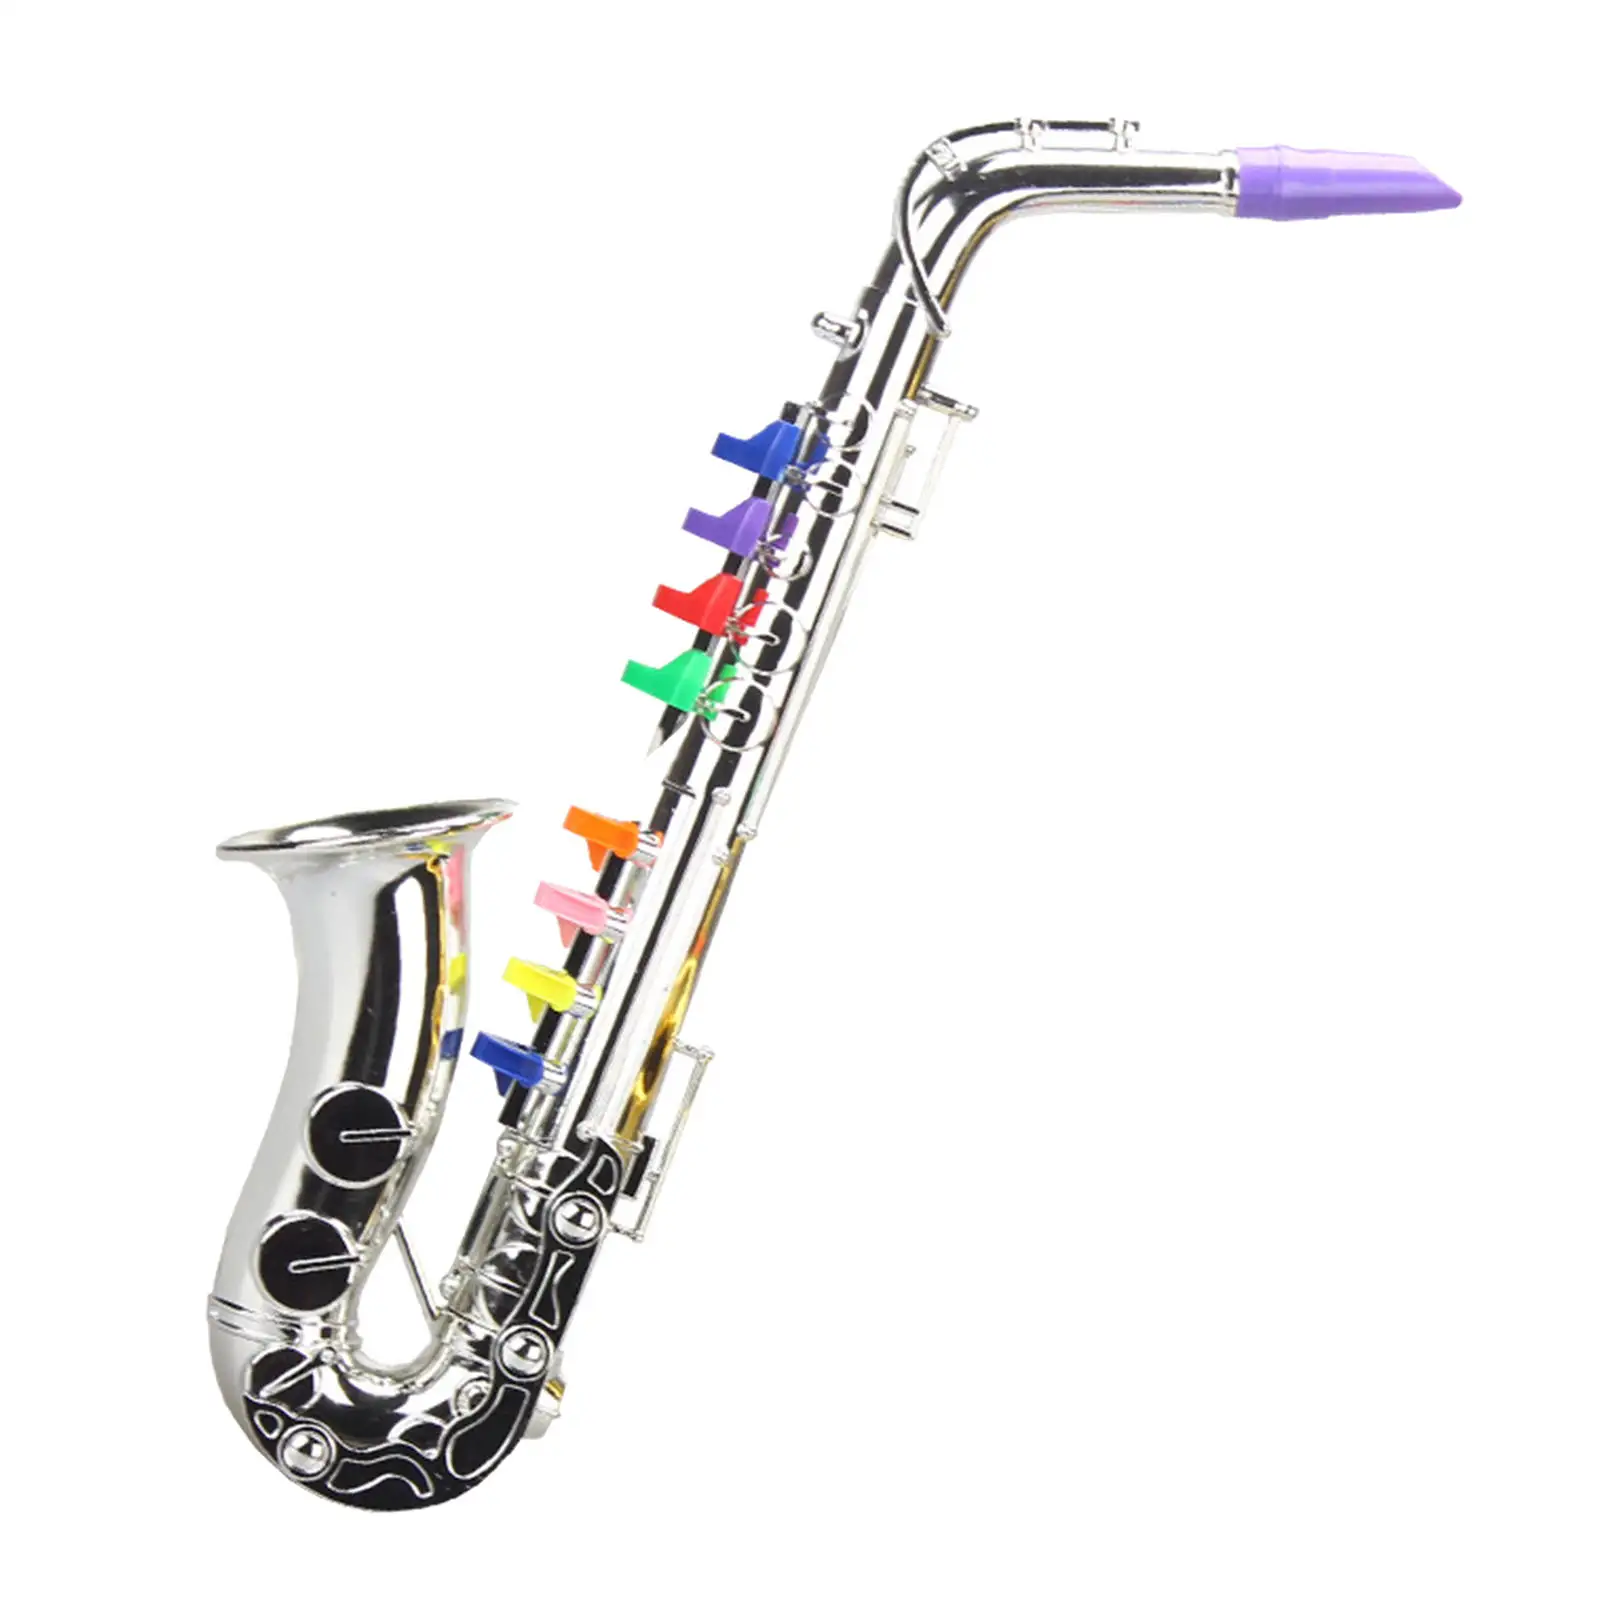 Preschool Music Educational Development Toys Saxophone with 8 Notes Playing Sax 